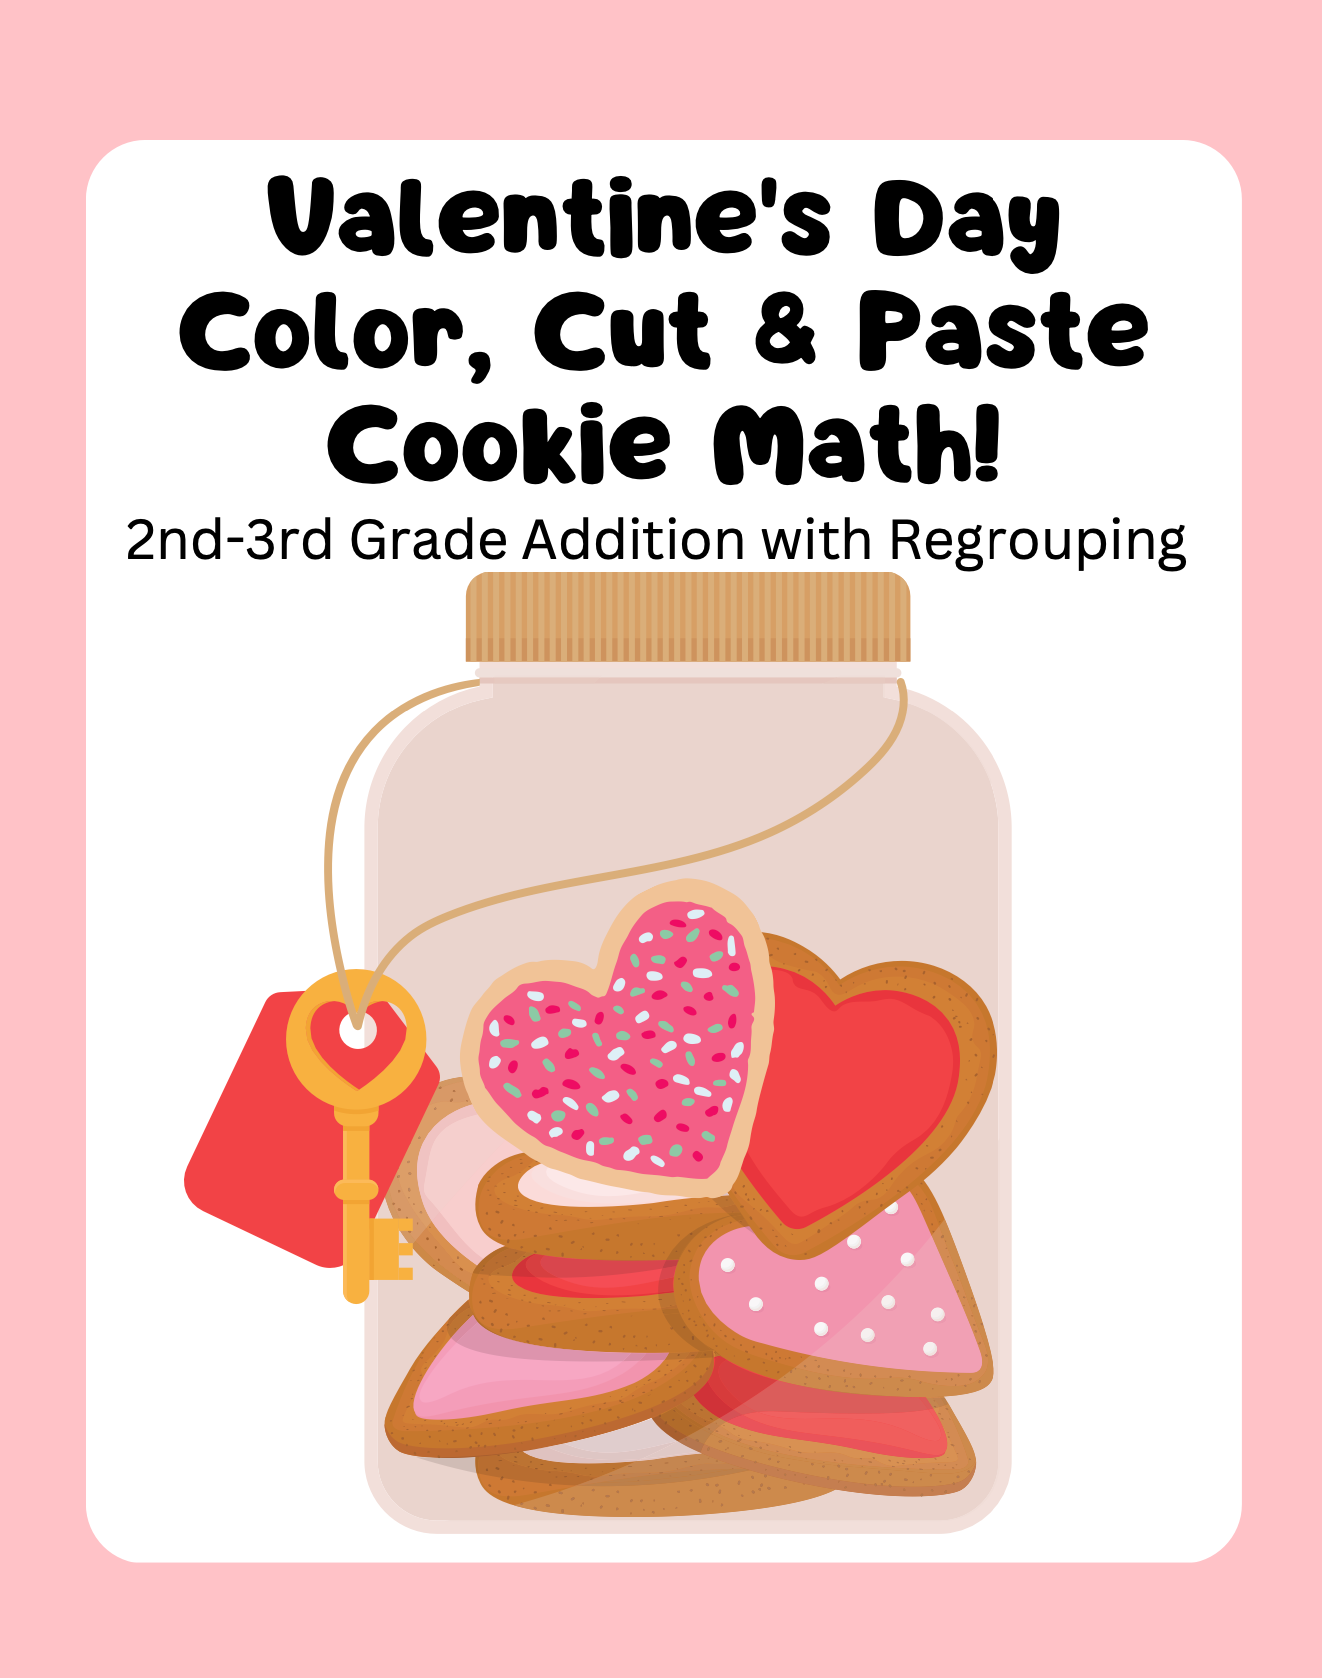 Valentine's Day Color, Cut & Paste Cookie Math! (2nd-3rd Grade)